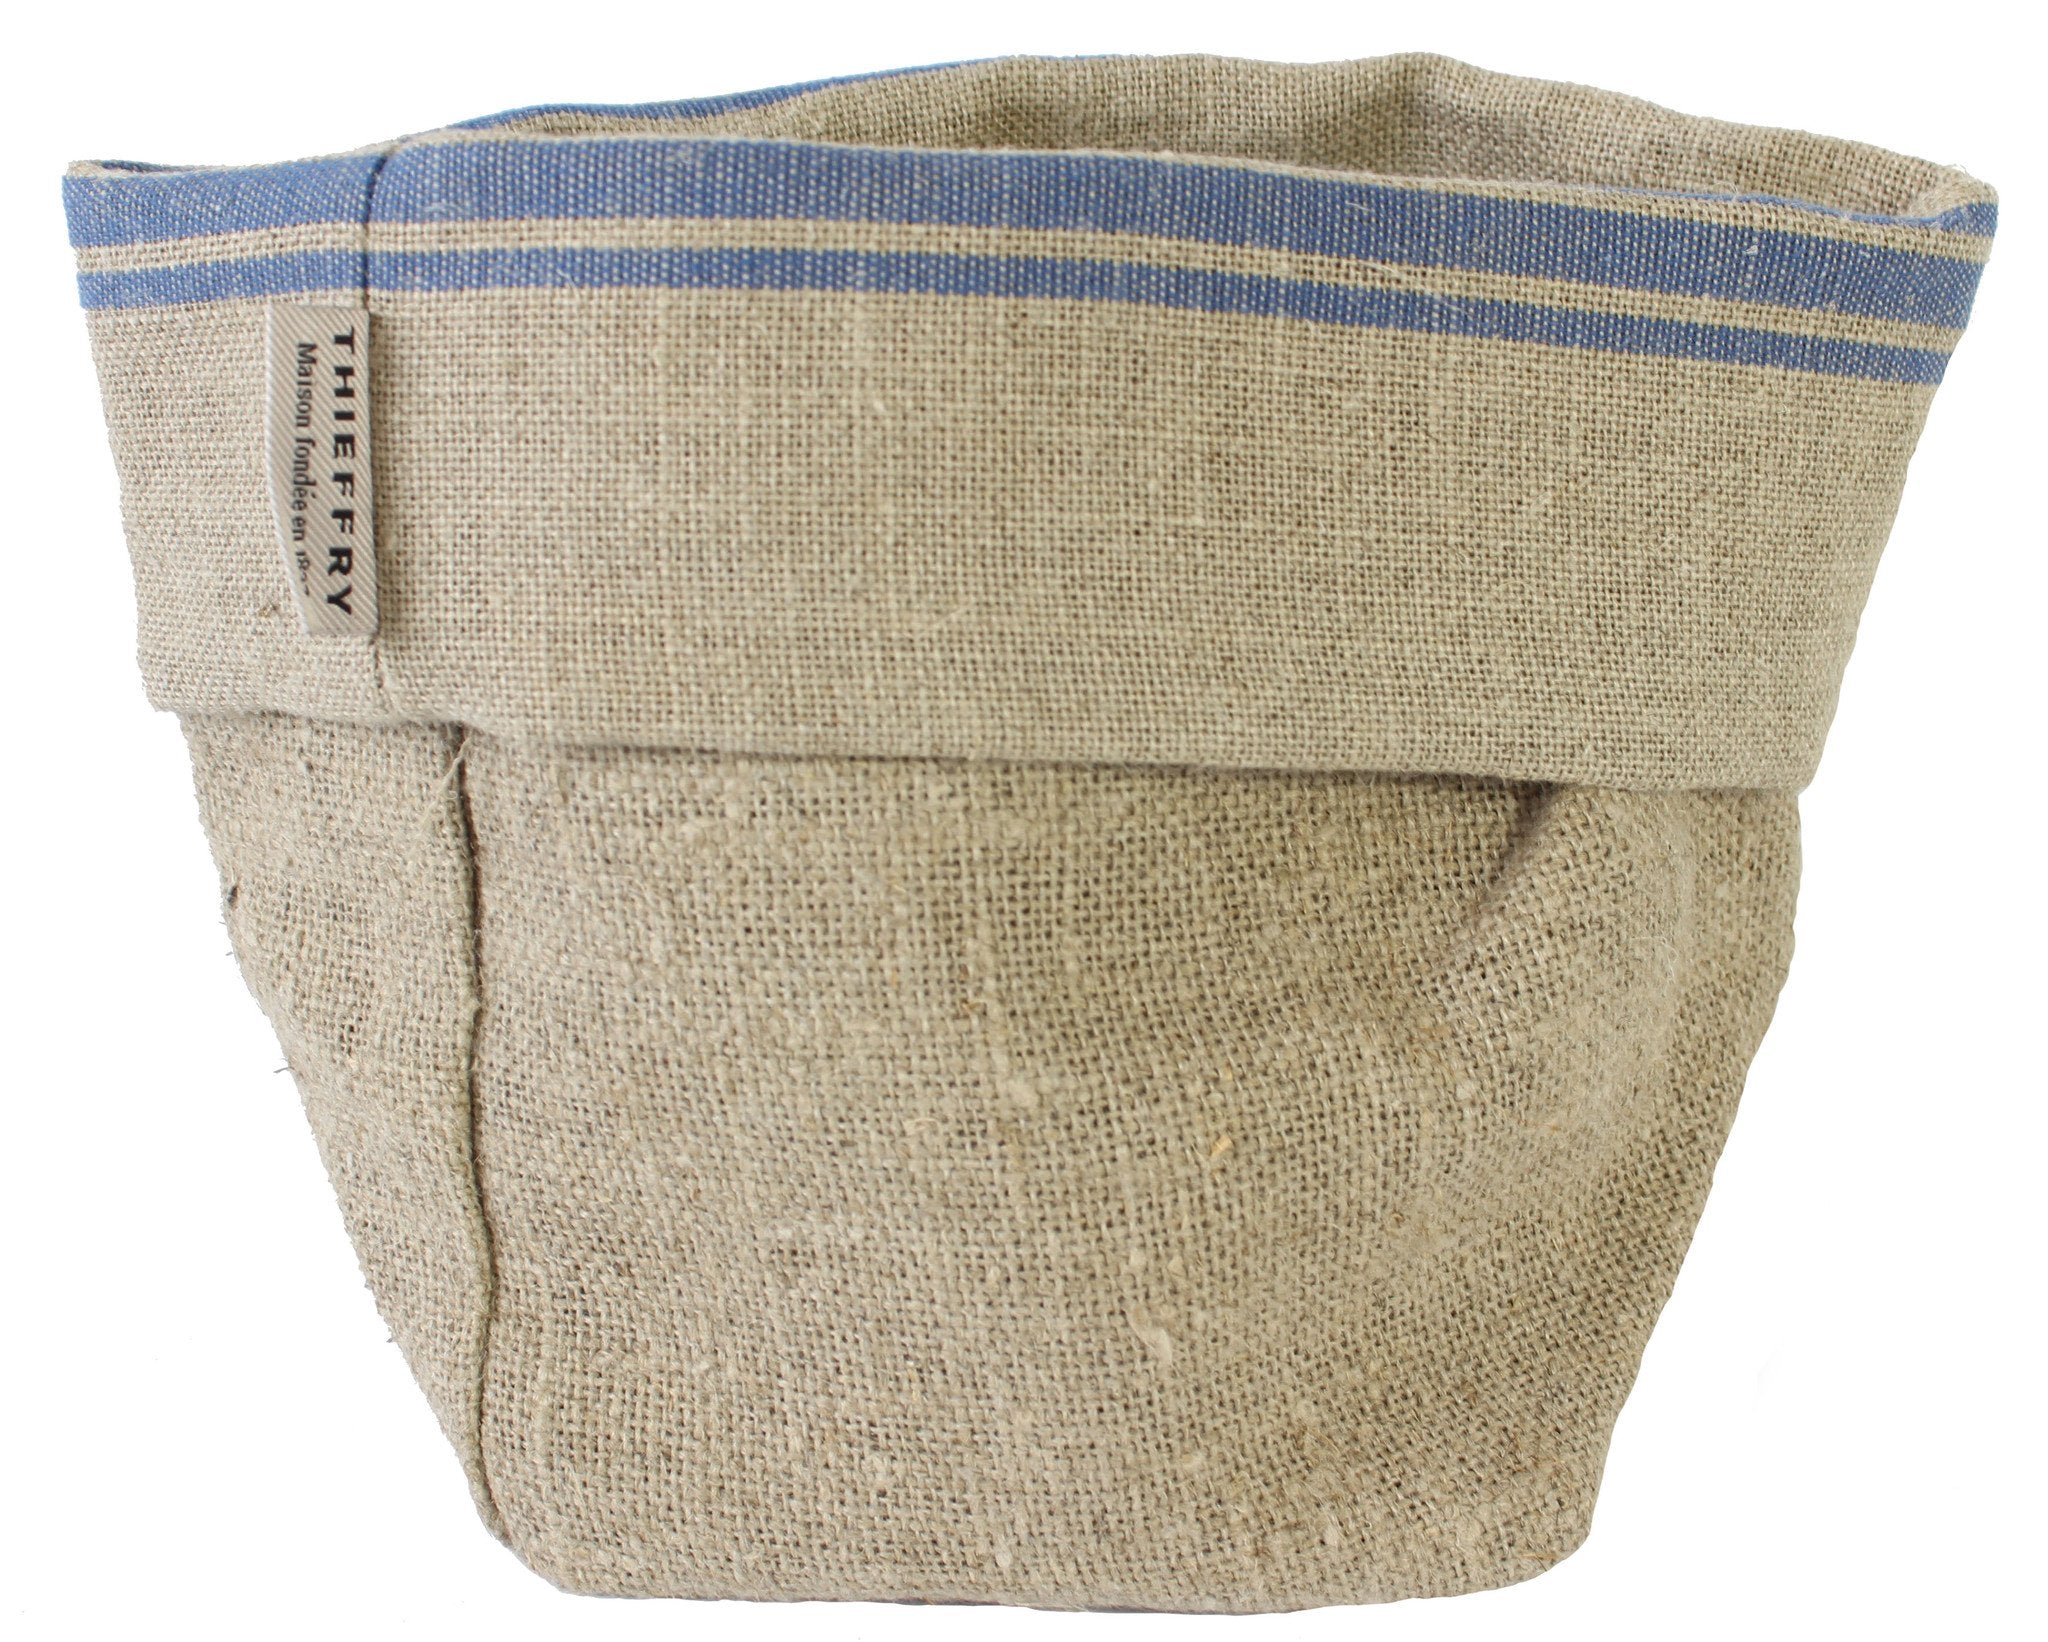 Thieffry Blue Monogramme Linen Bread Bag - French Dry Goods